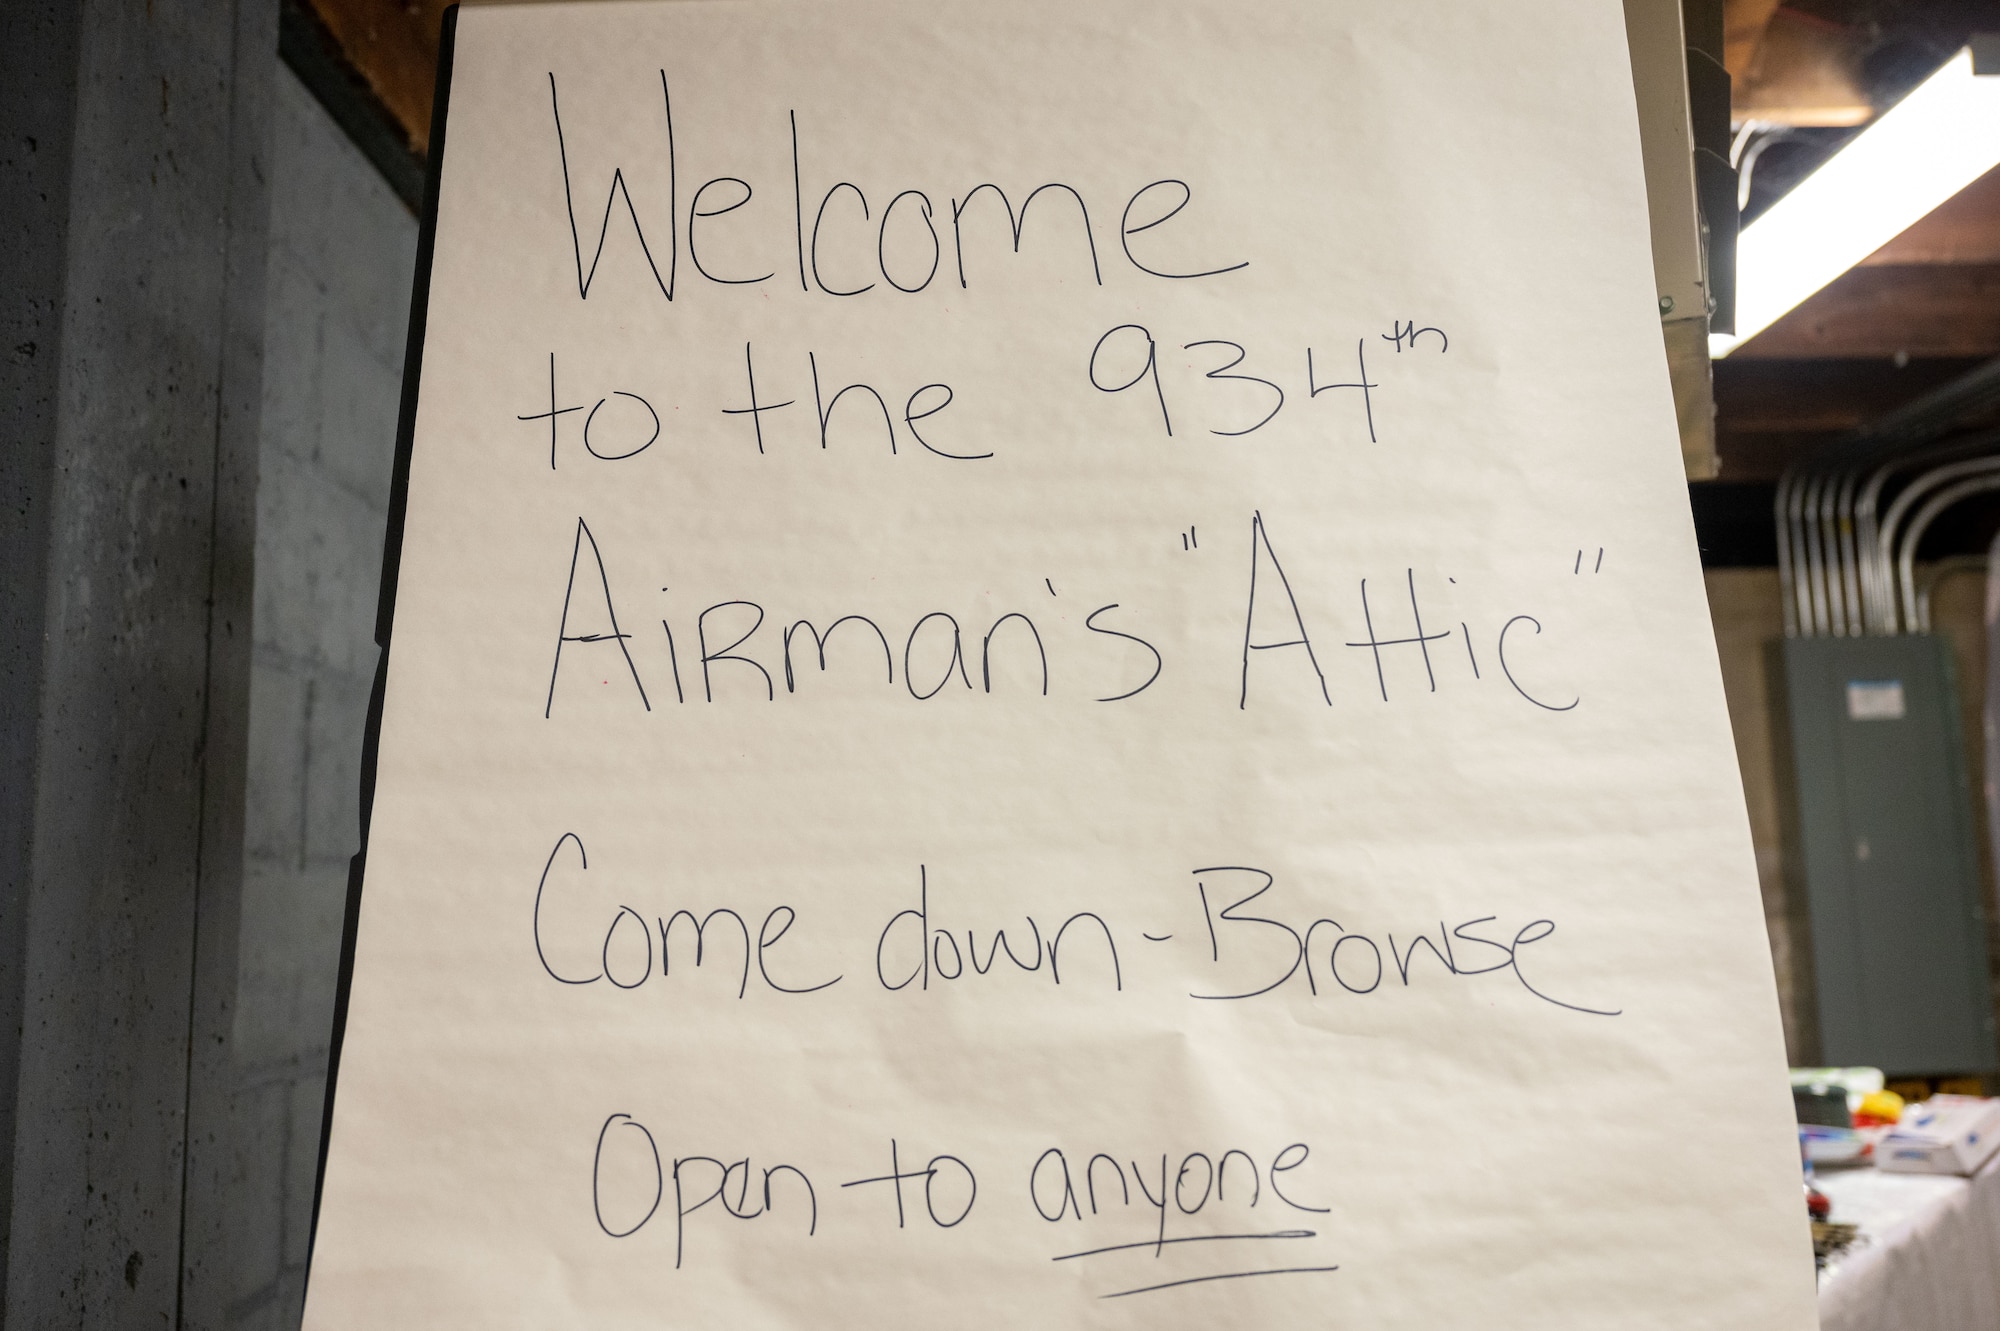 The Airman's Attic at the 934th Airlift Wing is open to support Airmen of all ranks and is run by a committee of volunteers looking to help others.